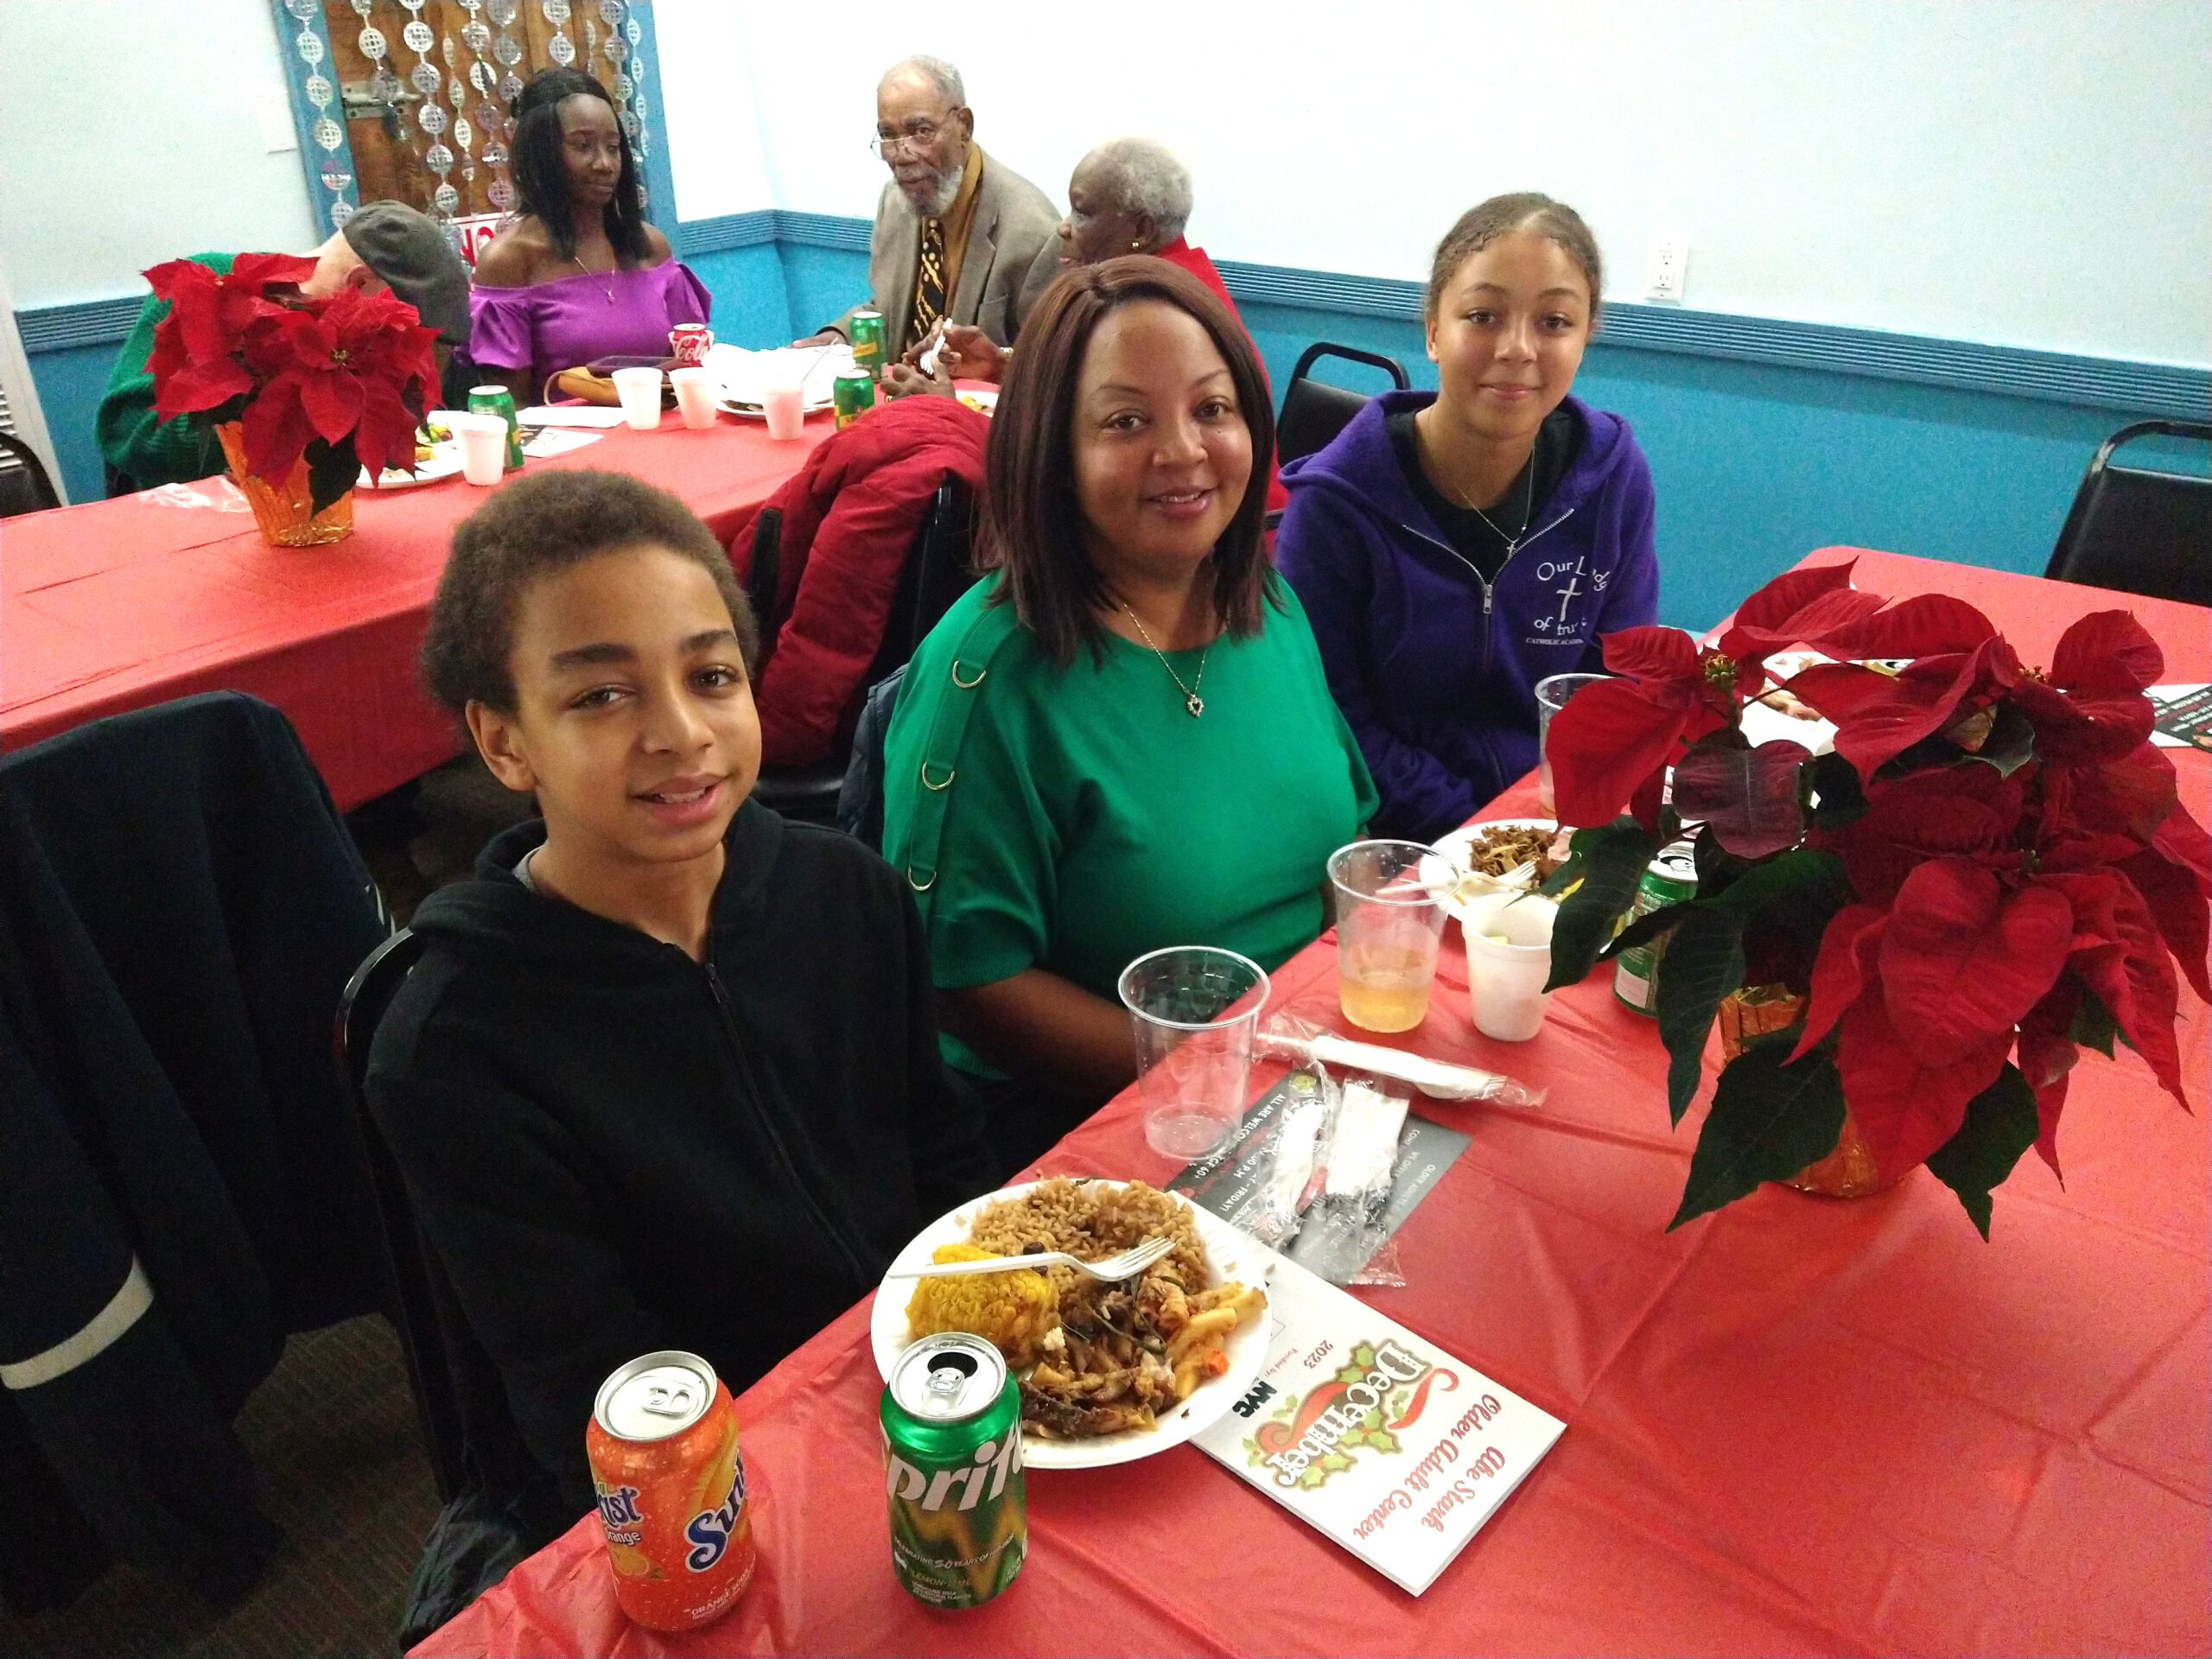 Patrons enjoying food and drink at the Midget Squadron Yacht Club for 69th Precinct Community Council’s annual holiday celebration.